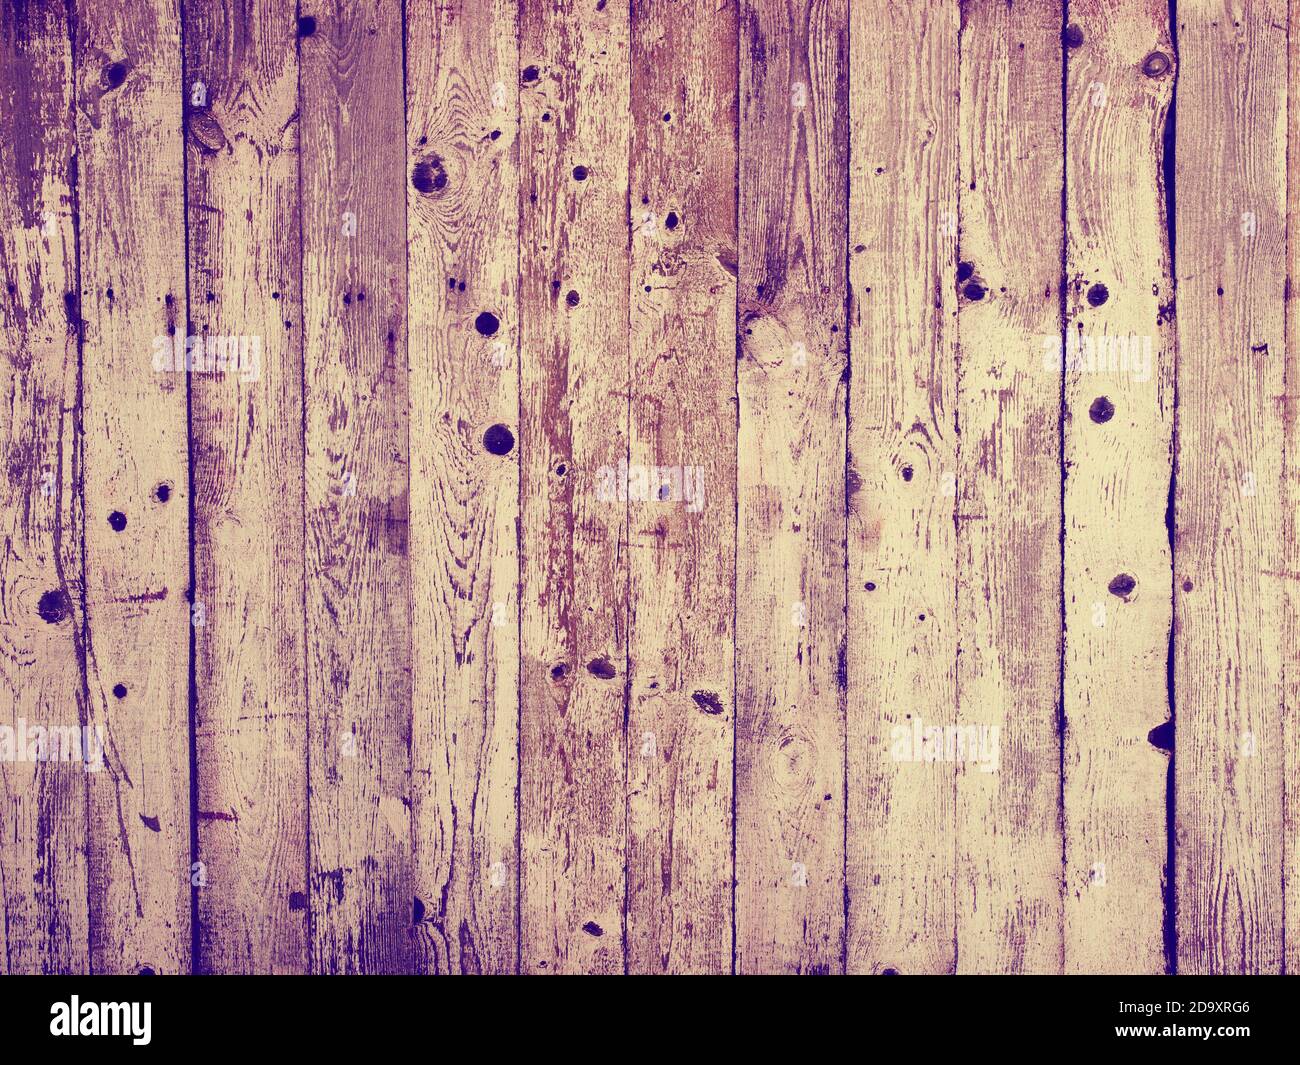 5,536,236 Wooden Board Images, Stock Photos, 3D objects, & Vectors